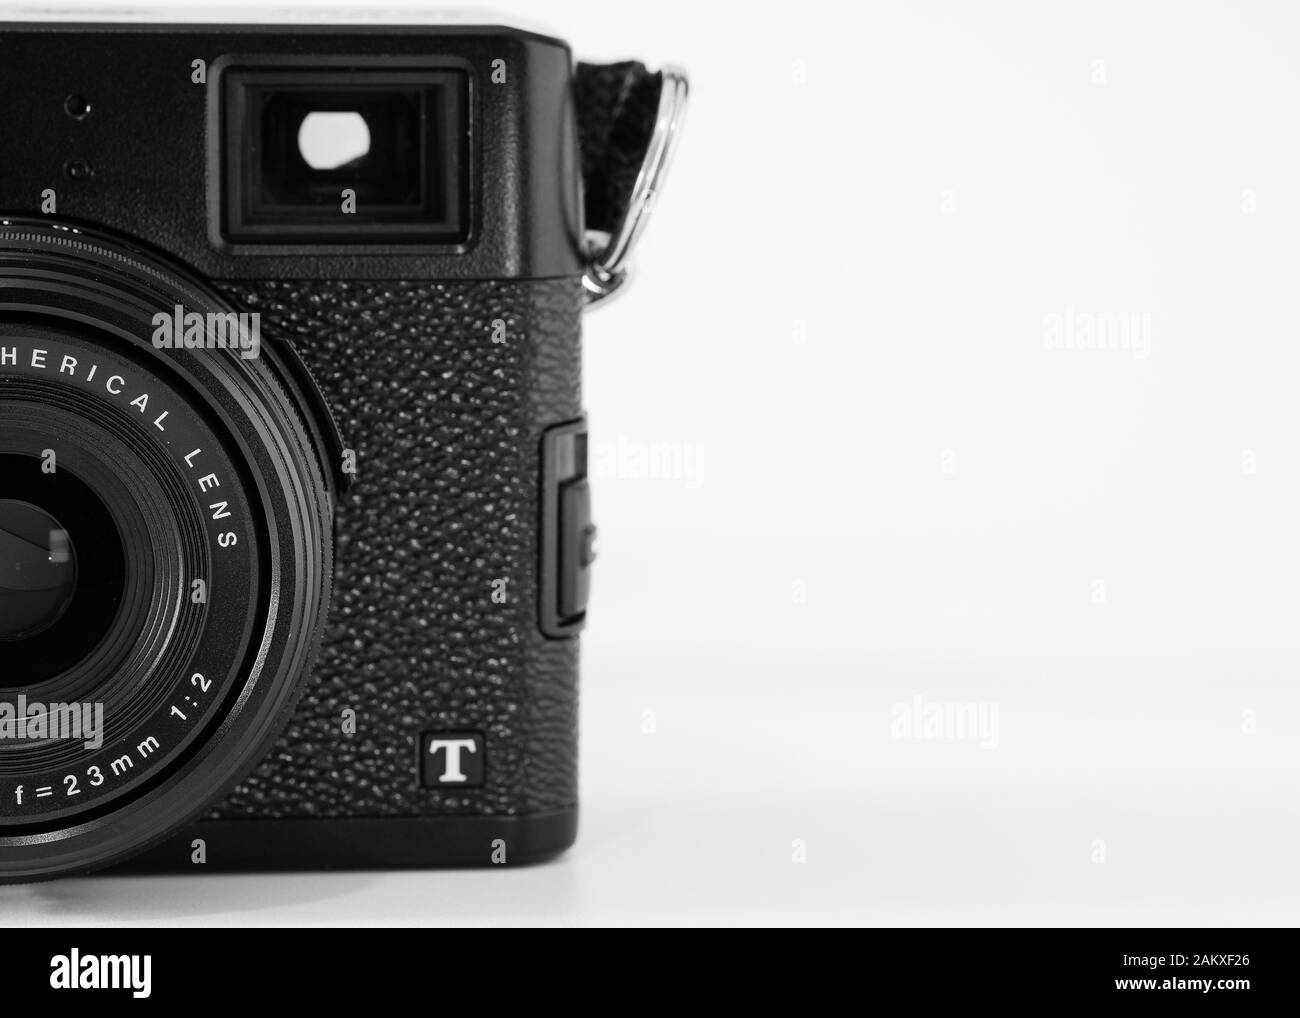 Partial view of a compact digital camera, Fujifilm brand, X100T model, optical viewfinder visible, monochrome image. Stock Photo